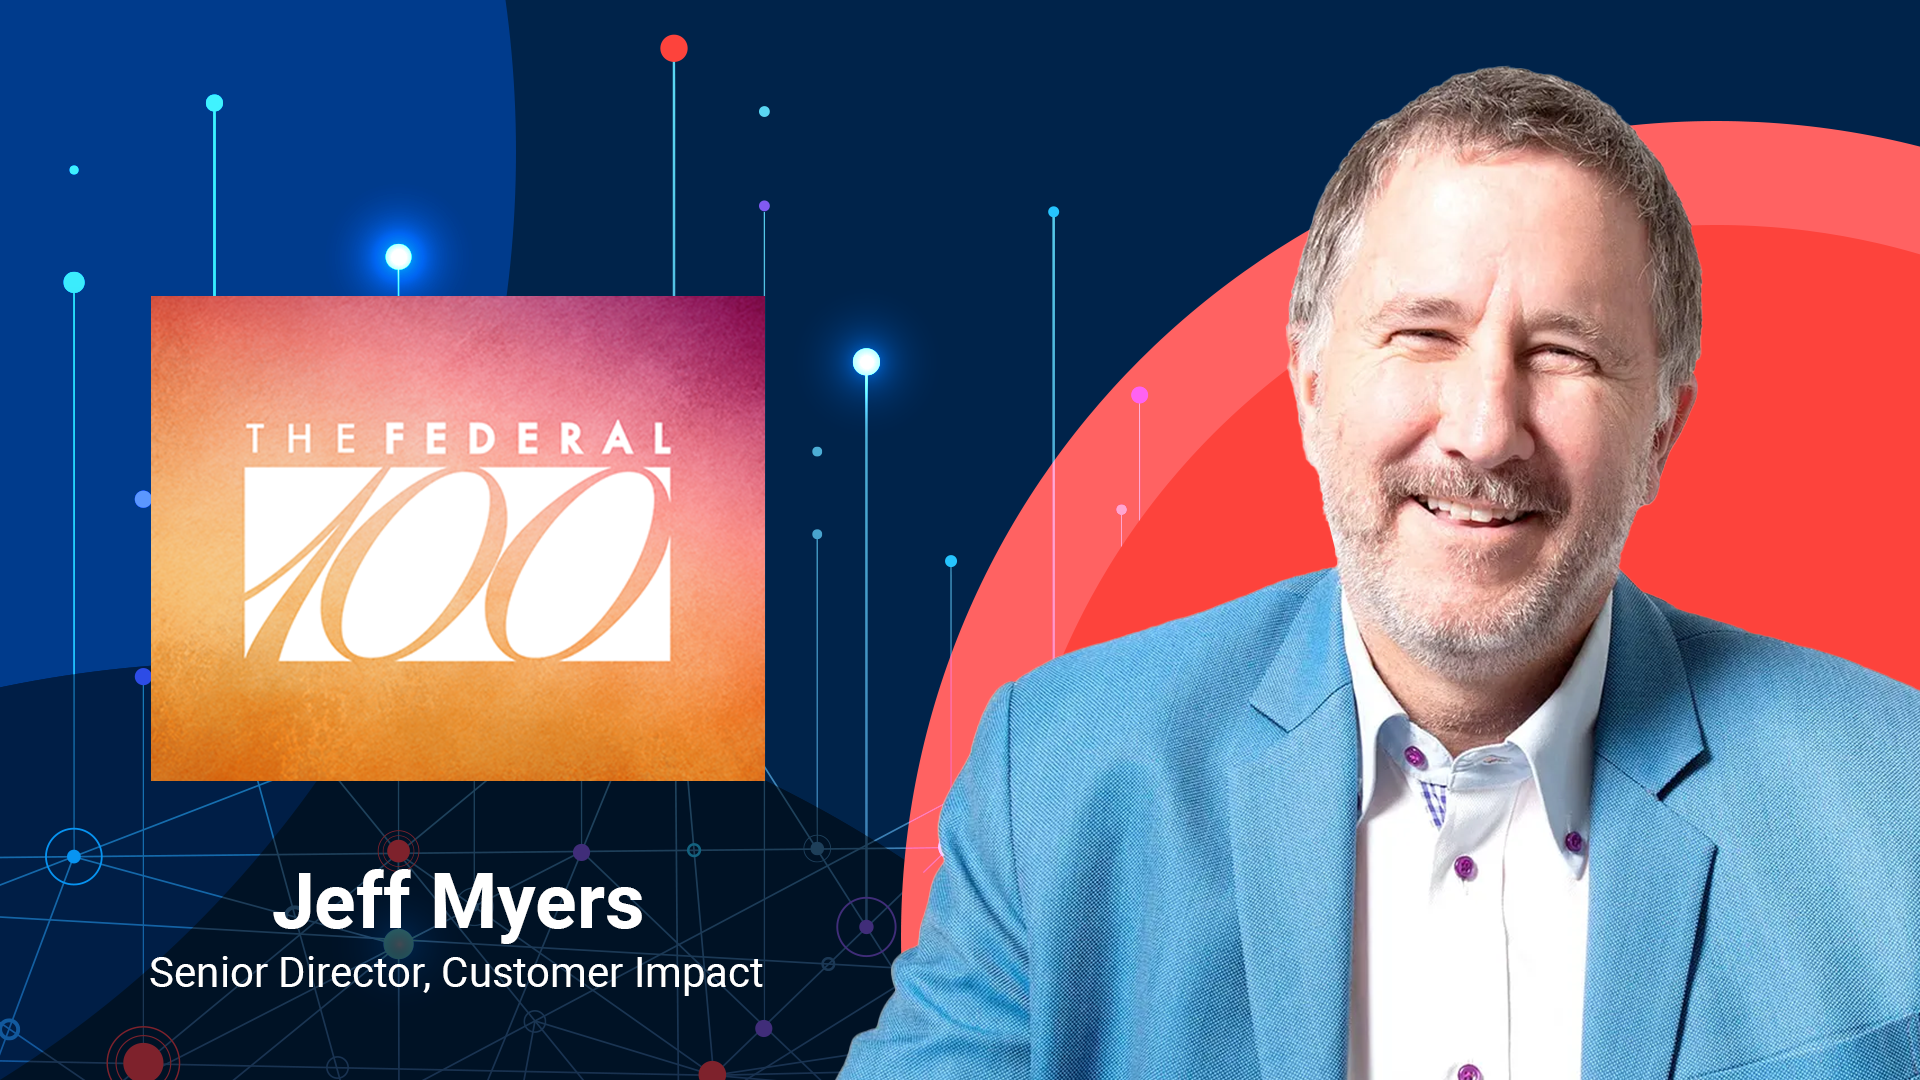 REI Systems Senior Director Jeff Myers Wins Federal 100 Award